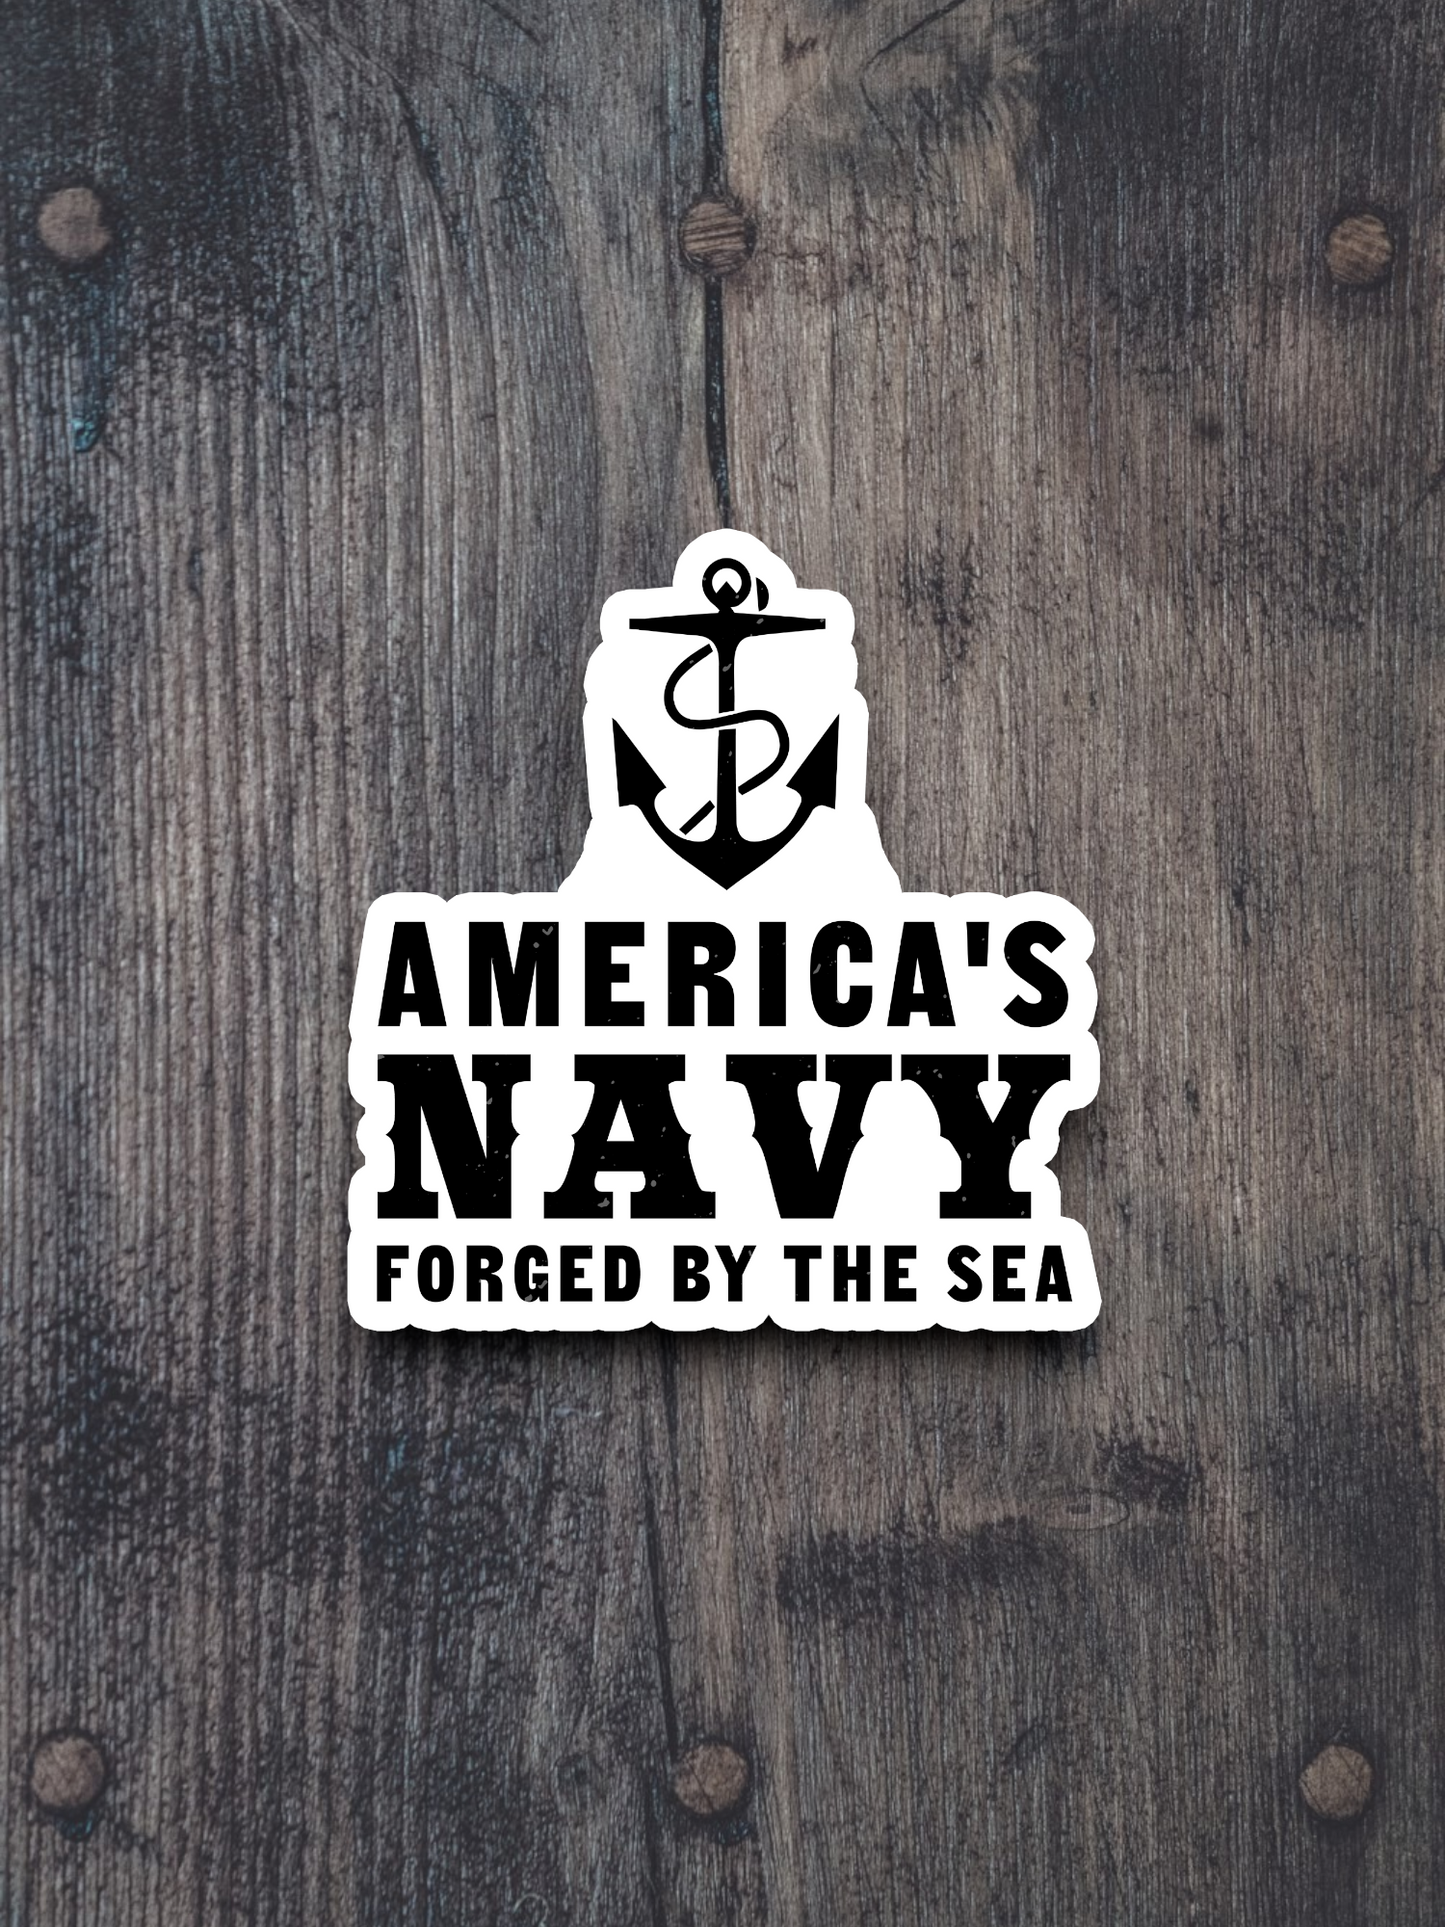 America's Navy Forged by the Sea - Military Sticker